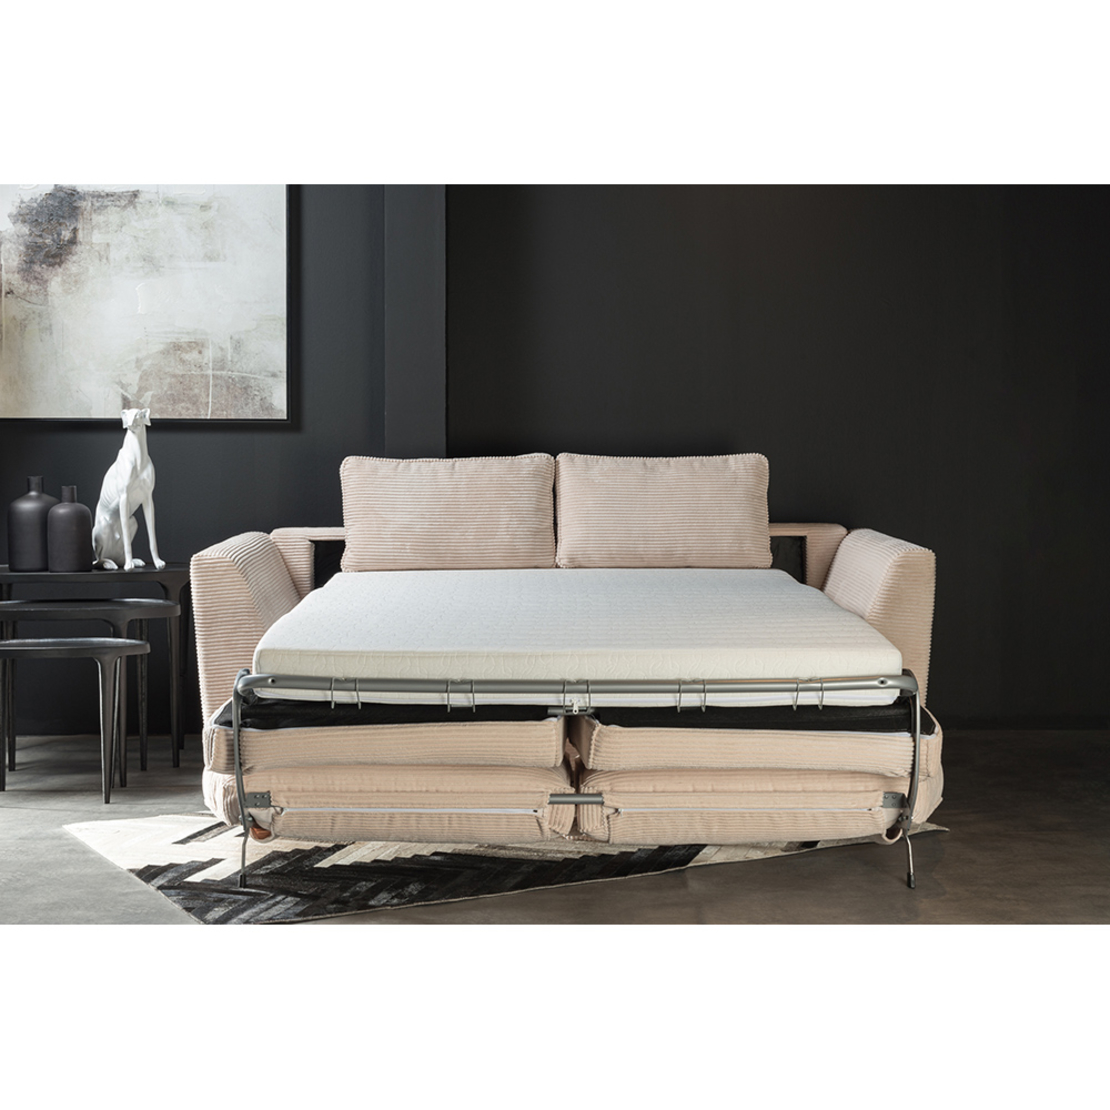 COCOON SOFA BED 3SEAT EASY CLEAN FABRIC BEIGE E1 E